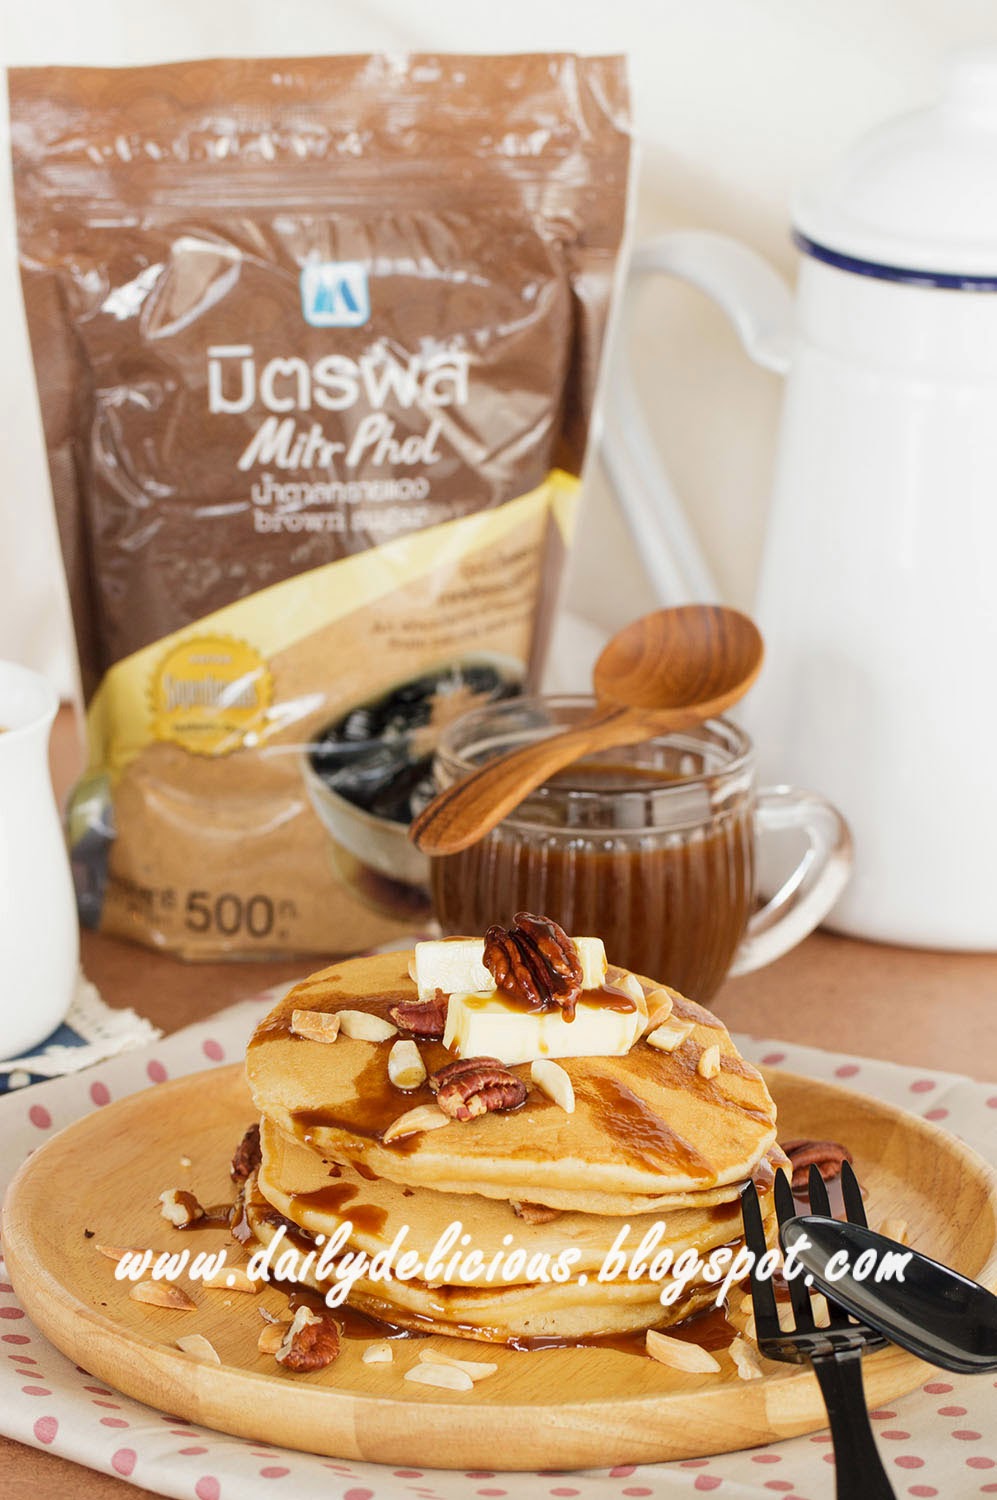 dailydelicious thai: Thick brown sugar pancake with Butterscotch toffee ...